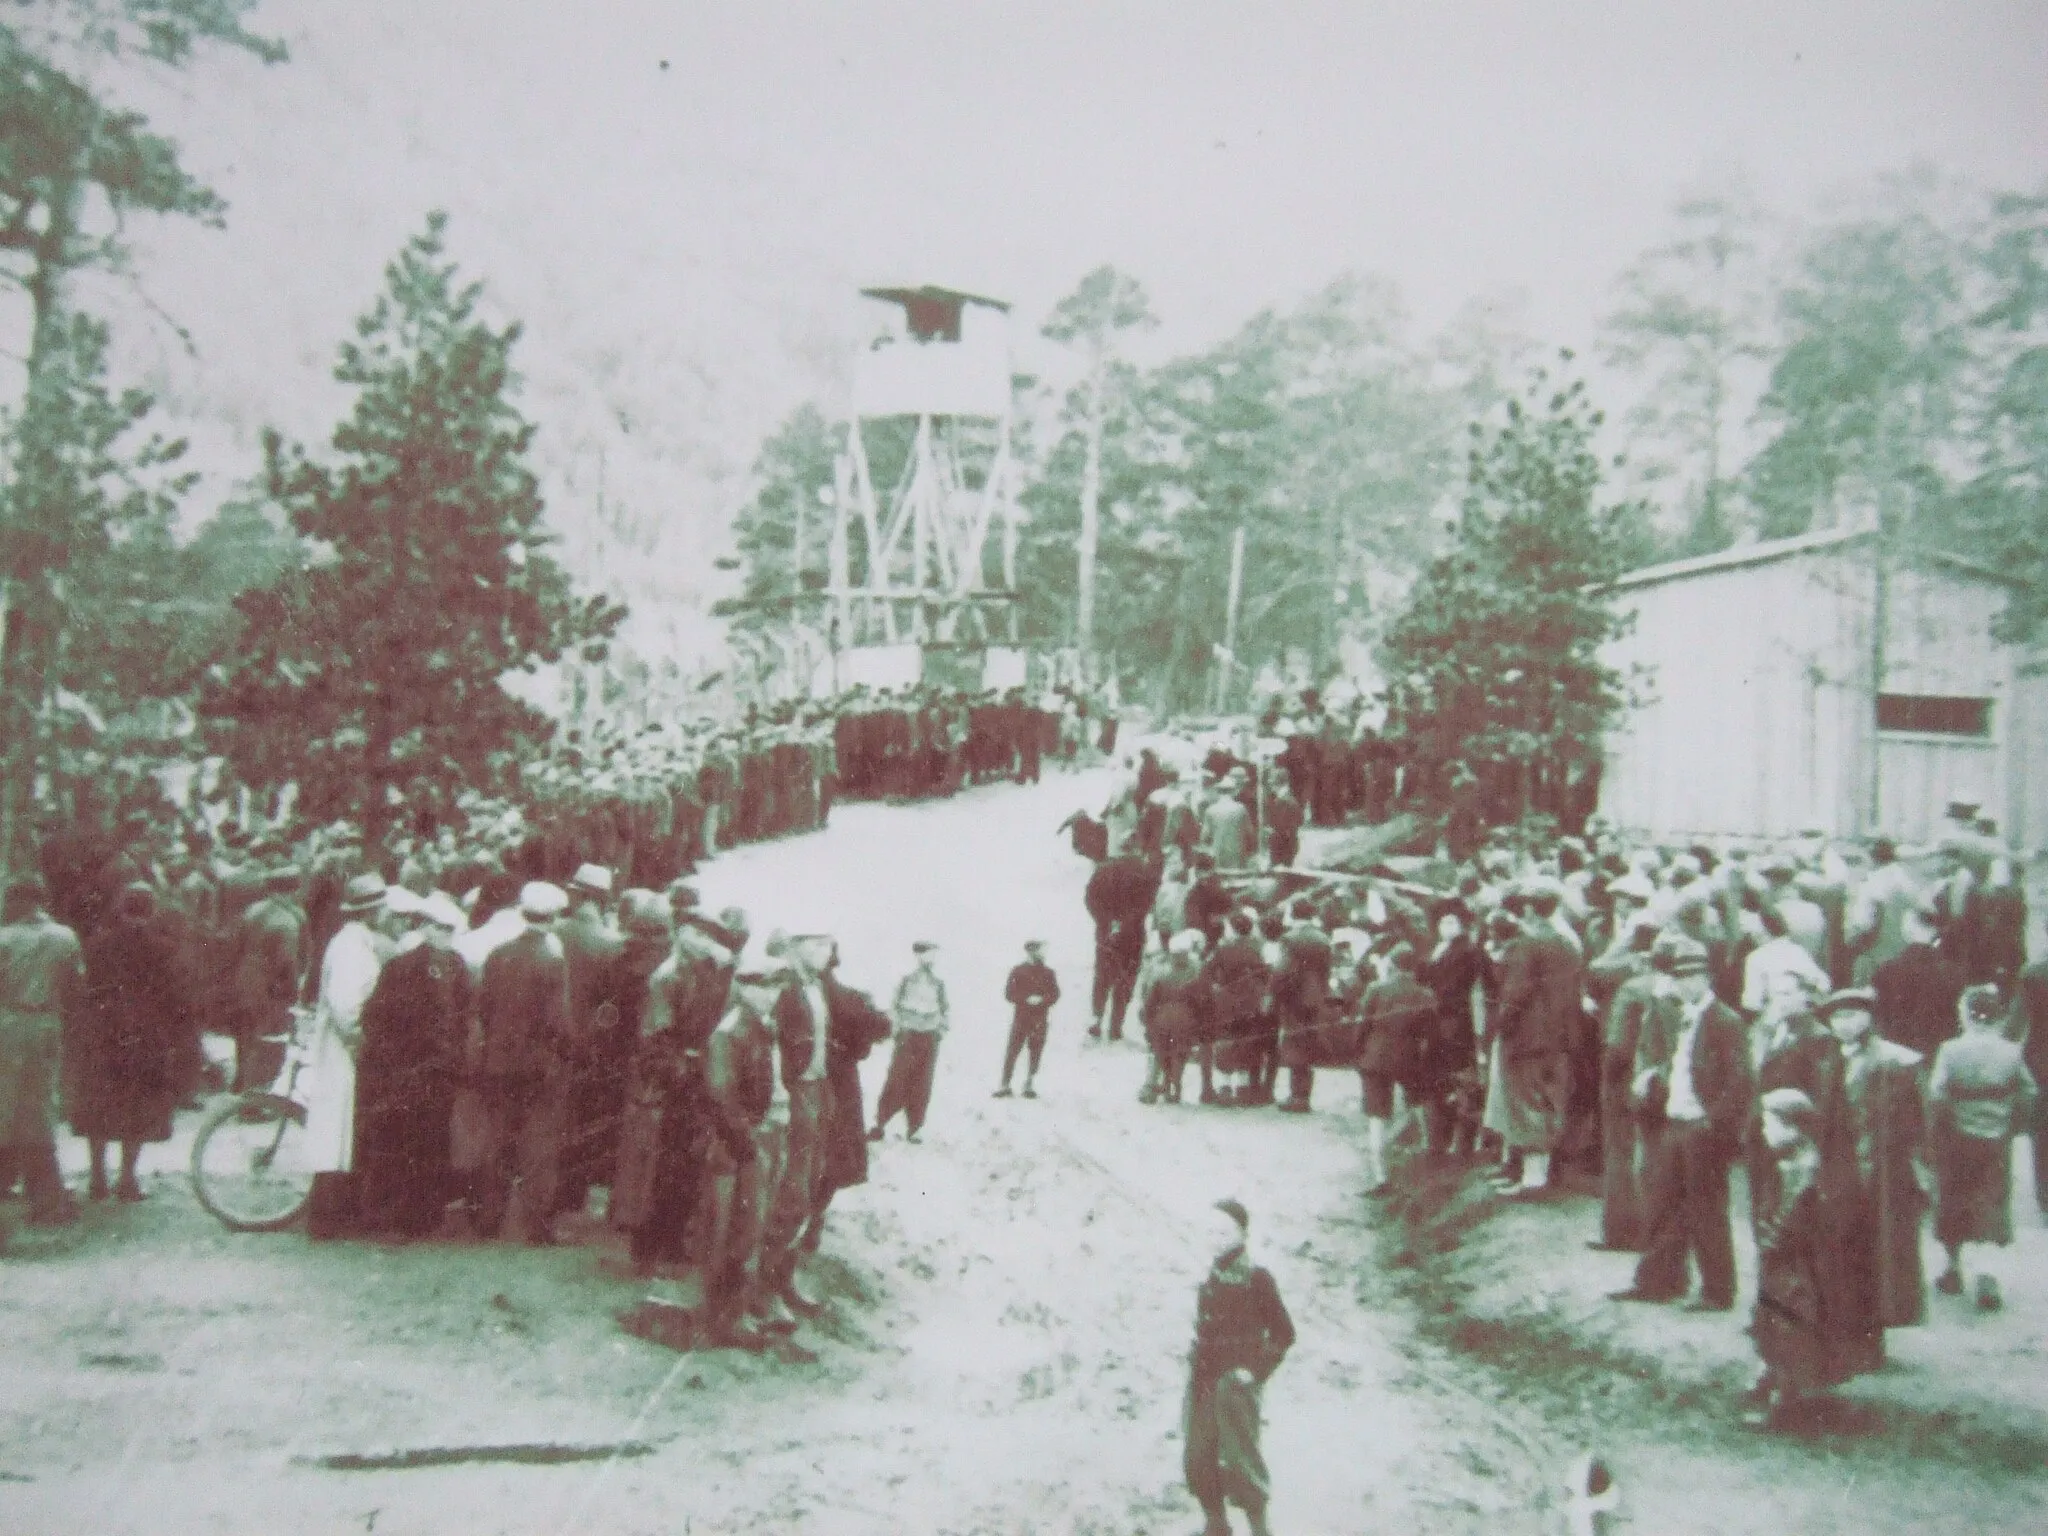 Photo showing: In may/june 1945 the POW camp in Botn, Saltdal, Norway, was liberated. Lots of peoples from the village have come to see the camp when it was opened and the russian soldiers was released.